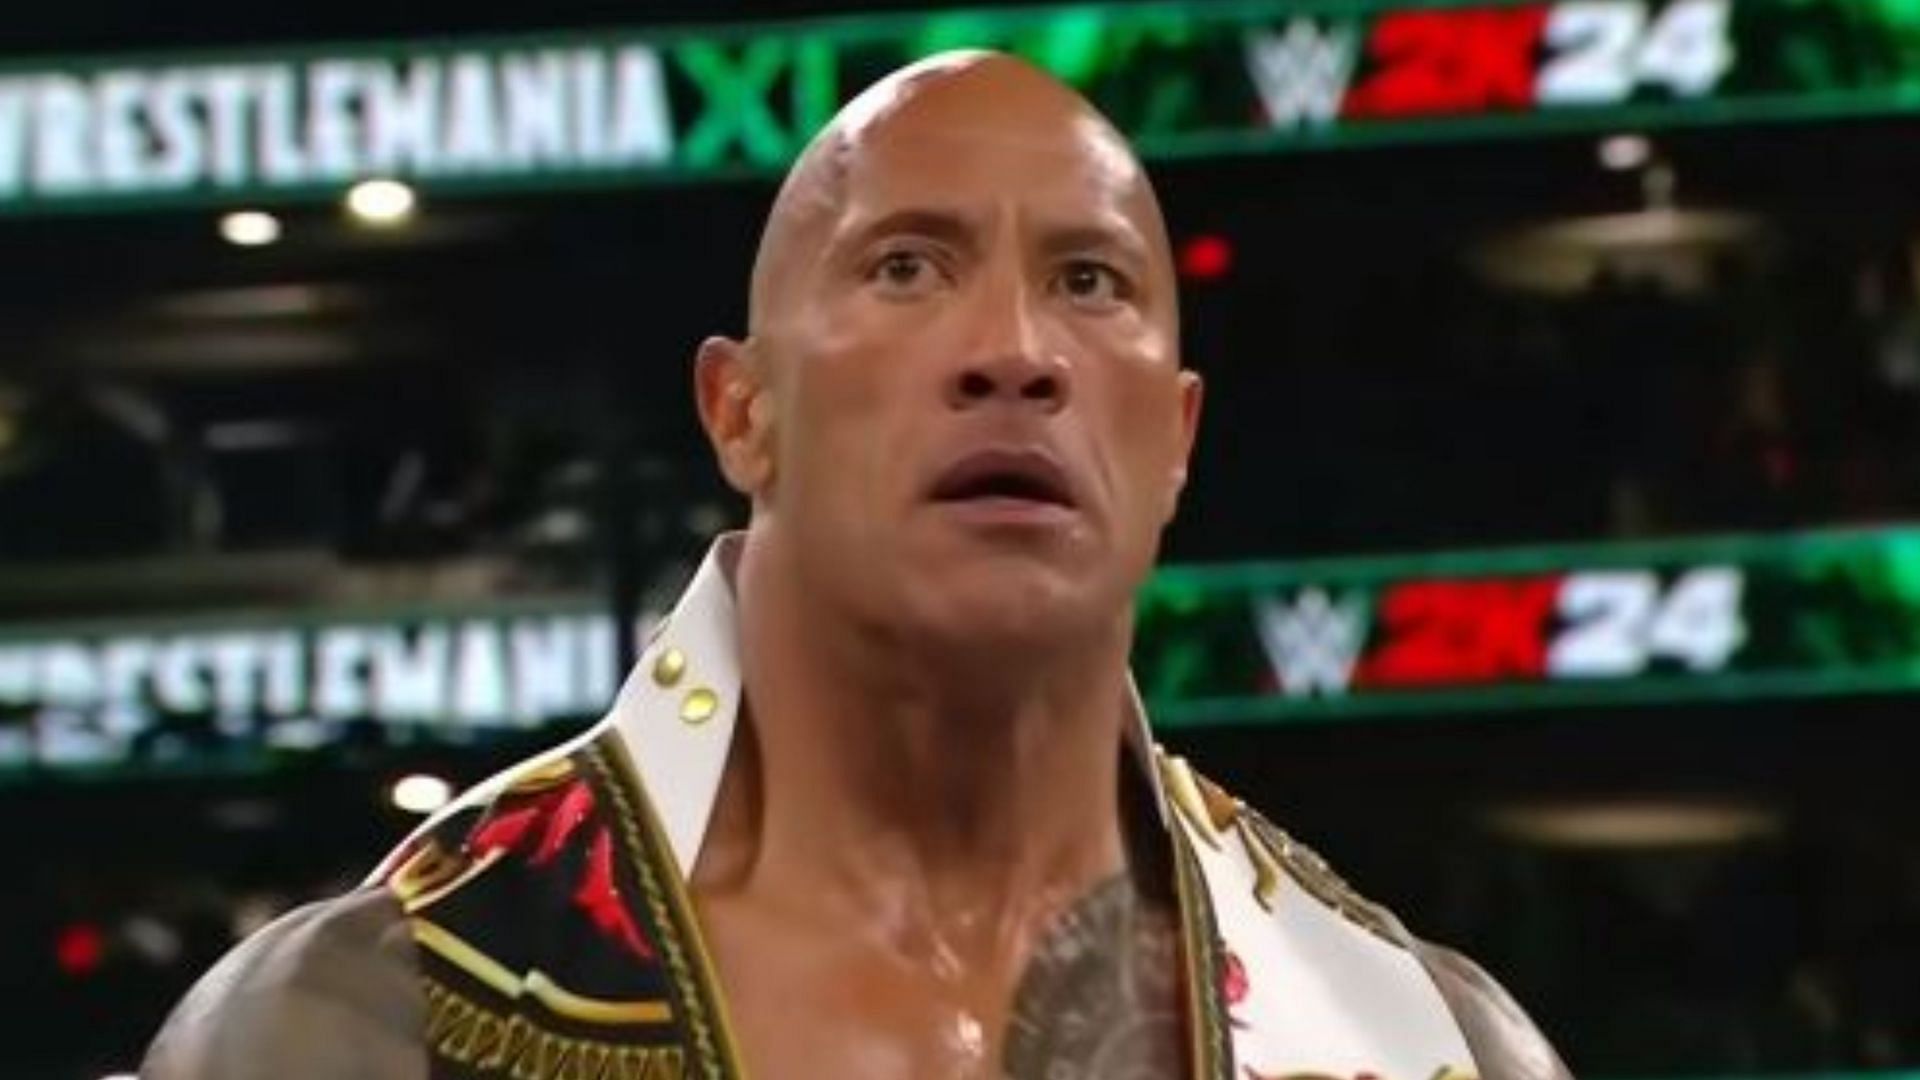 The Rock will go on hiatus after competing at WWE WrestleMania XL